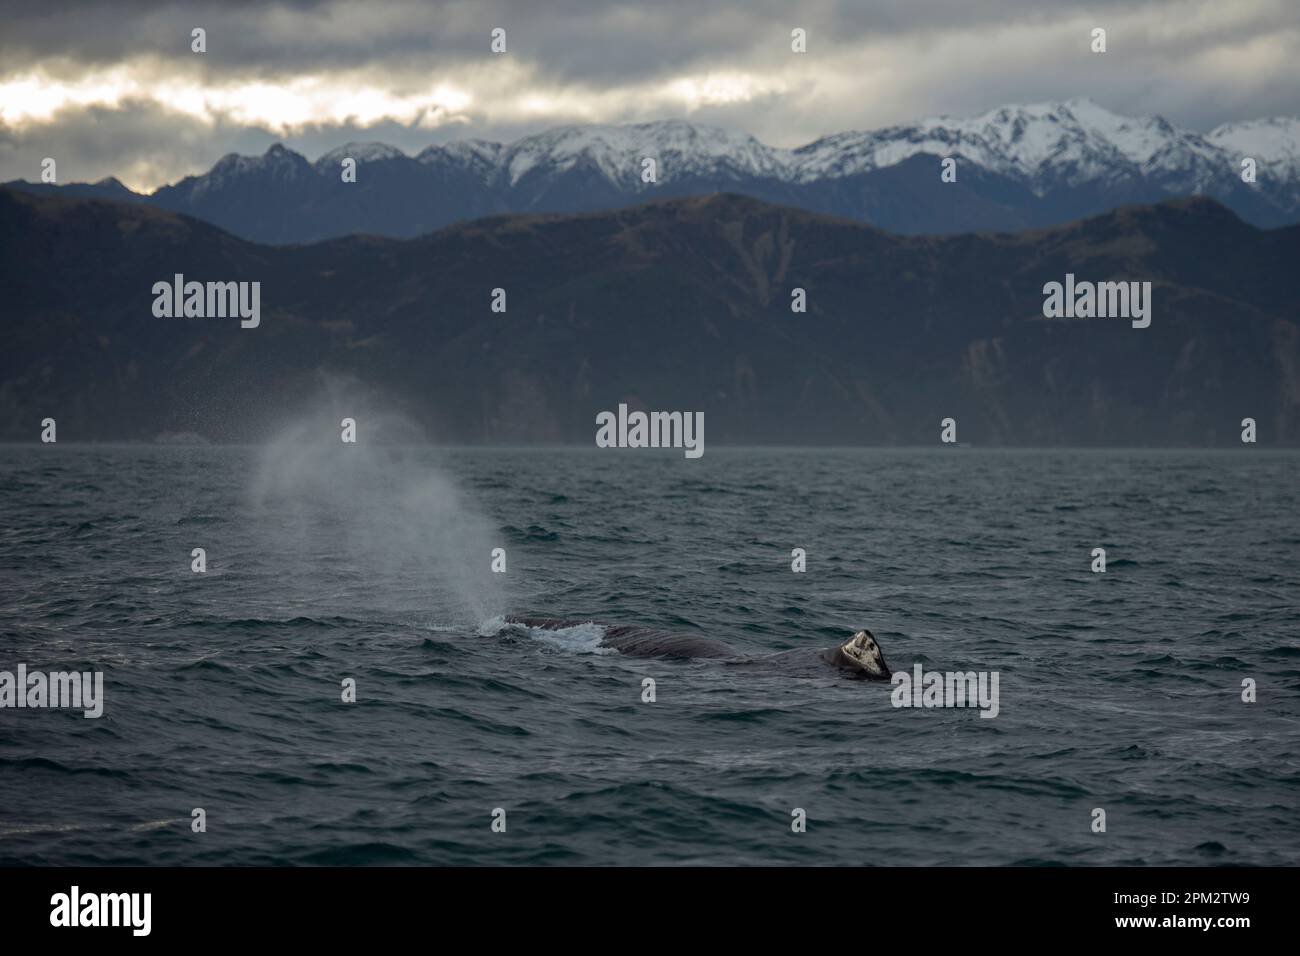 Sperm Whale, Physeter macrocephalus, blowing spray with snow-covered mountains in background, classified on IUCN Red List as Vulnerable, Kaikoura, Can Stock Photo